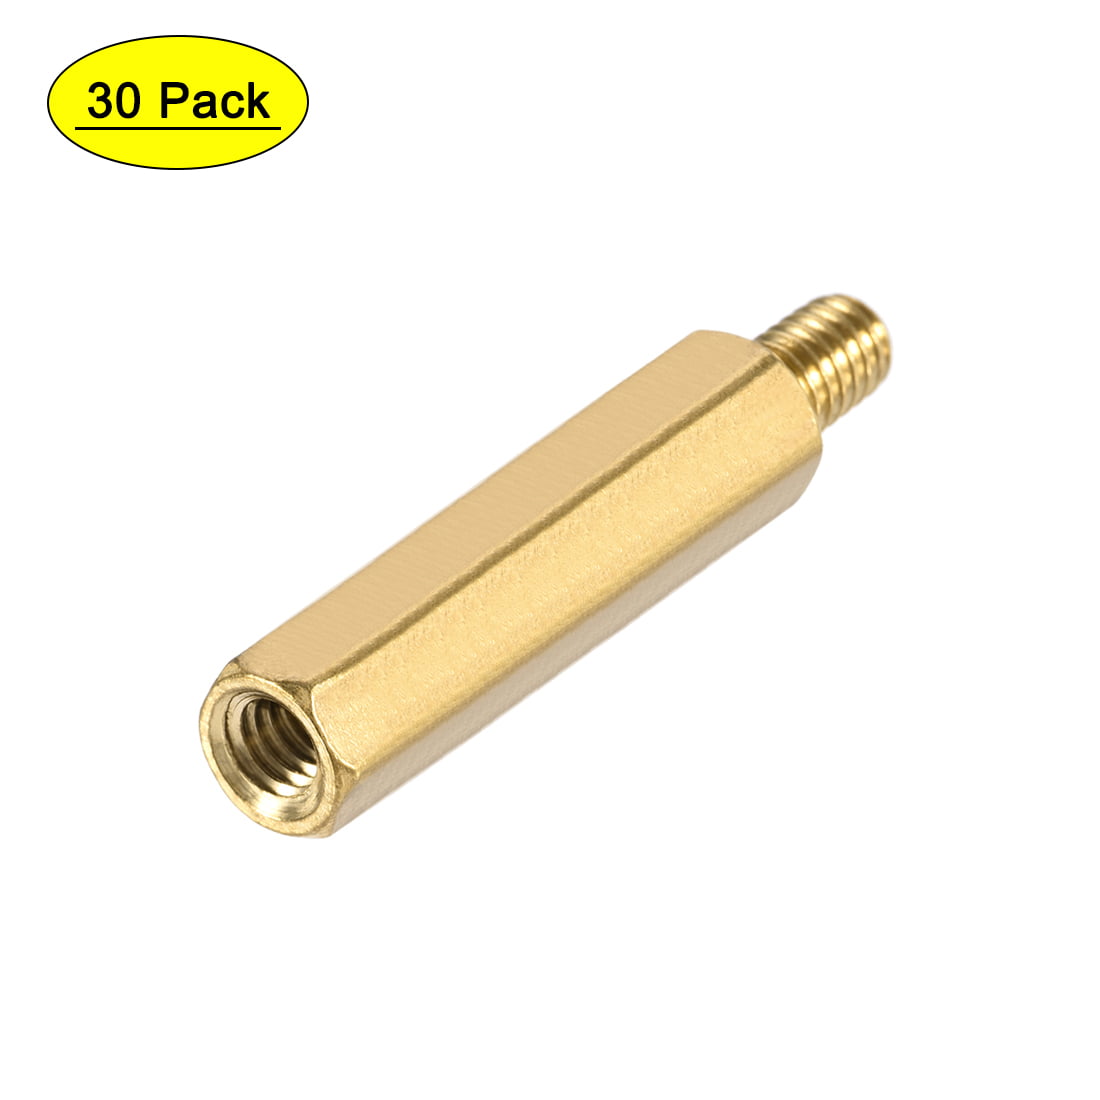 M4 x 35 mm 6 mm Male to Female Hex Brass Spacer Standoff 30pcs 